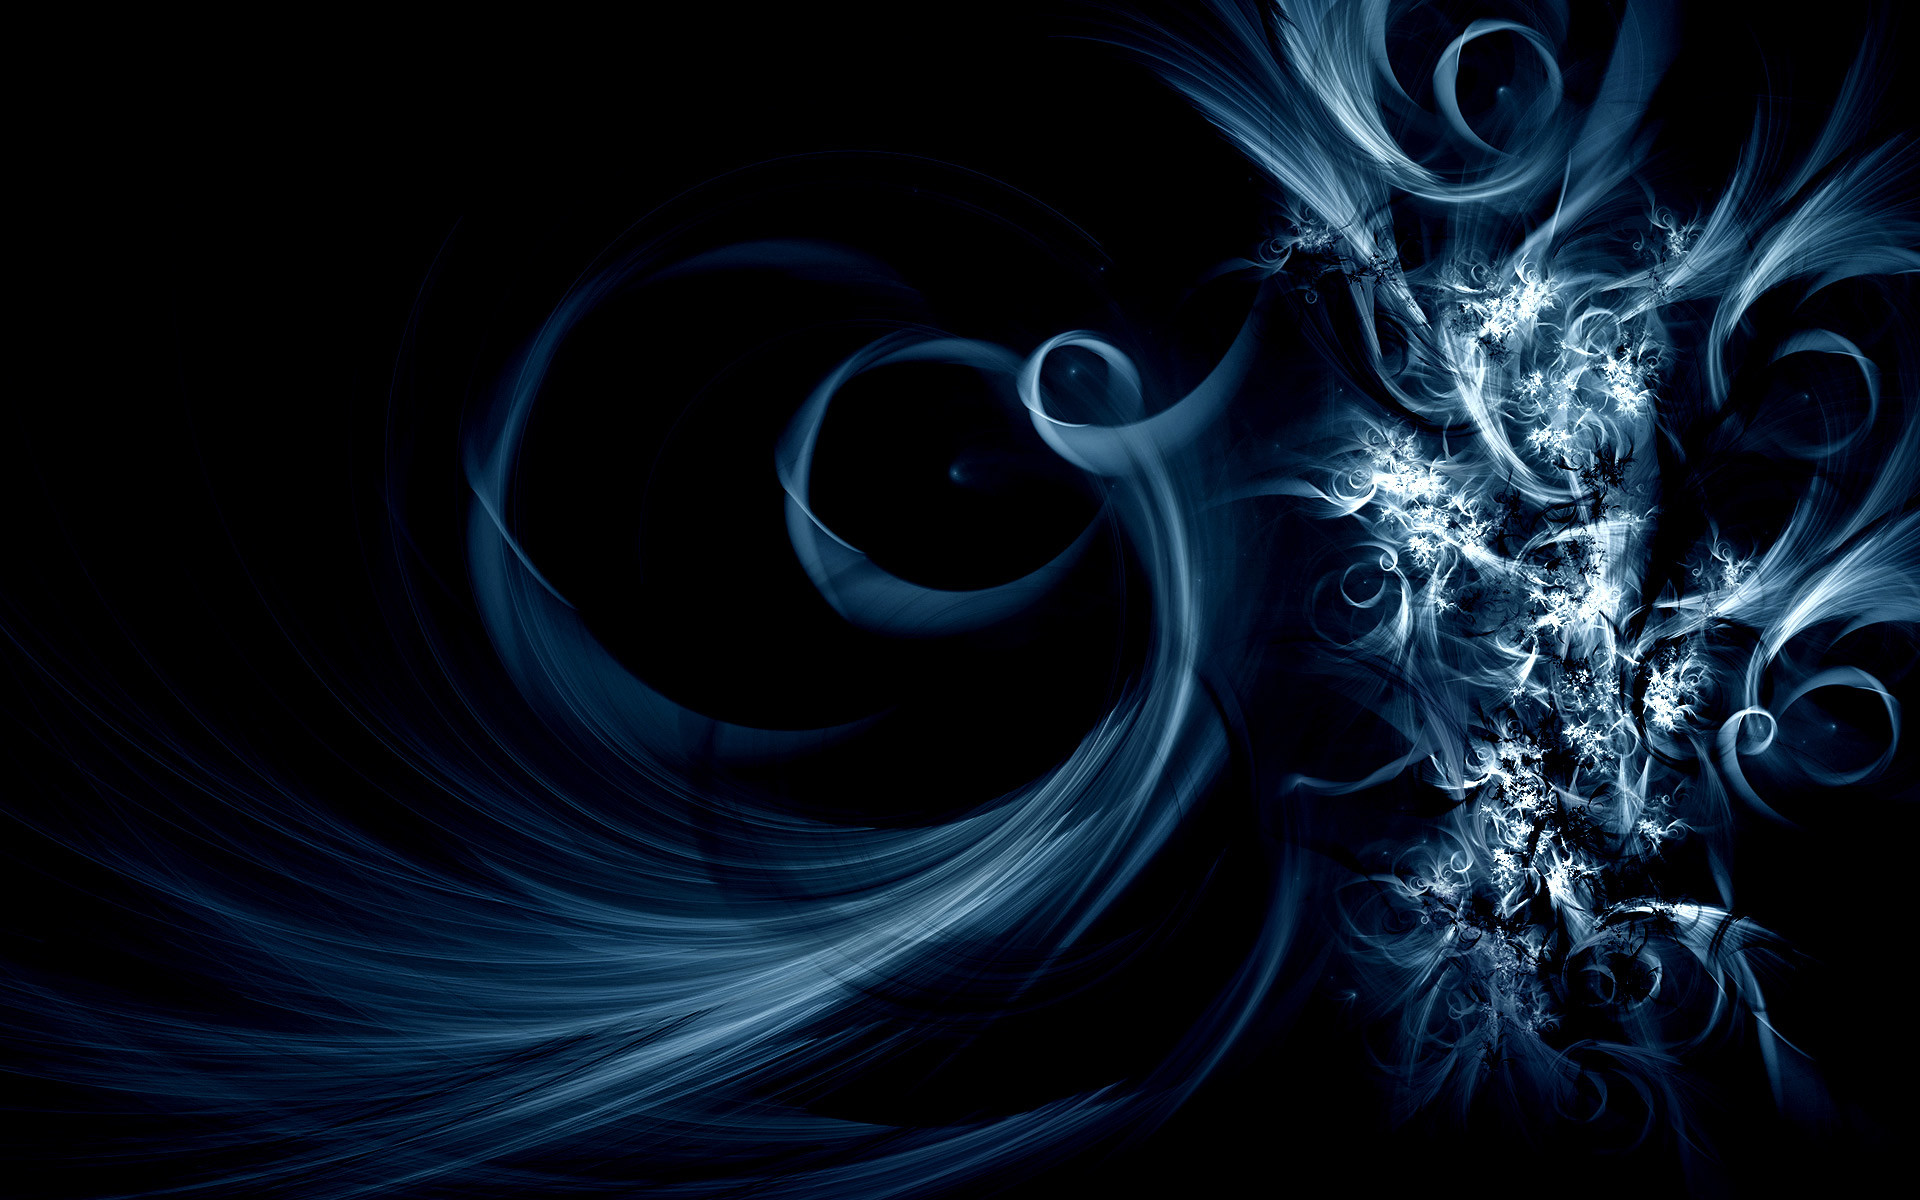 1920x1200 Blue Swirly Abstract Backgrounds for Presentation - PPT Backgrounds  Templates